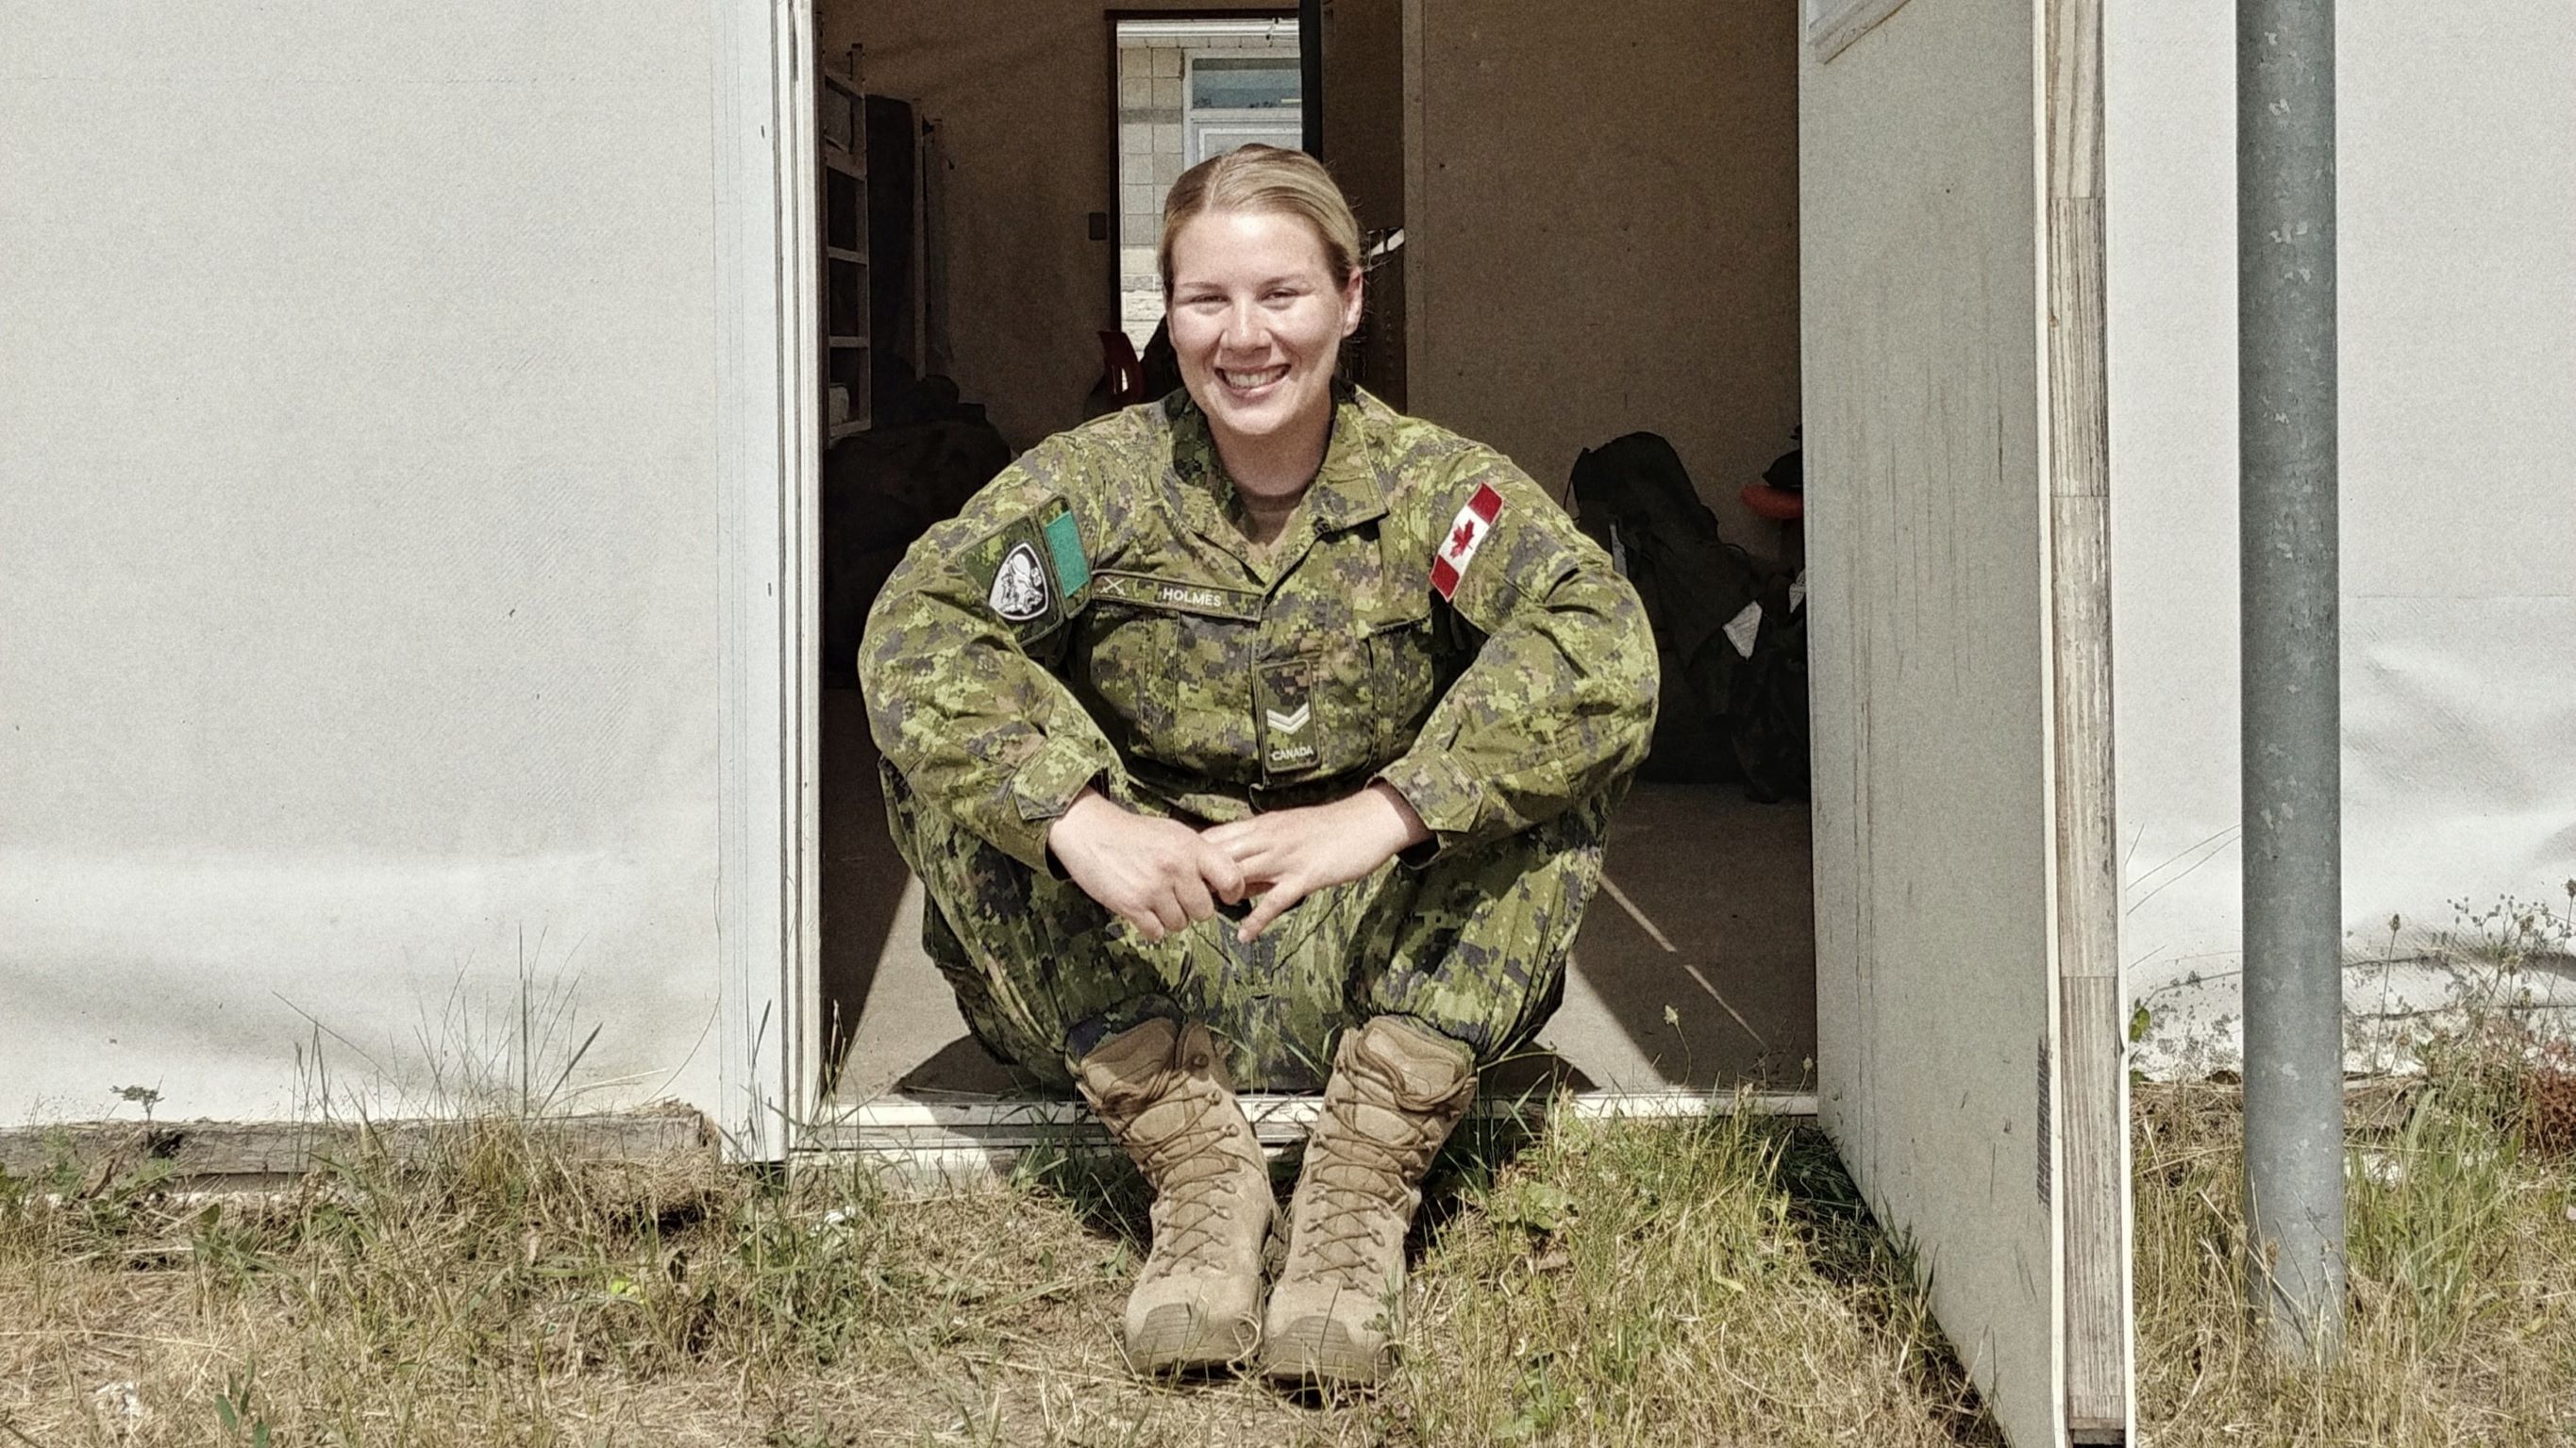 A woman in Canadian Military uniform sits in a doorway